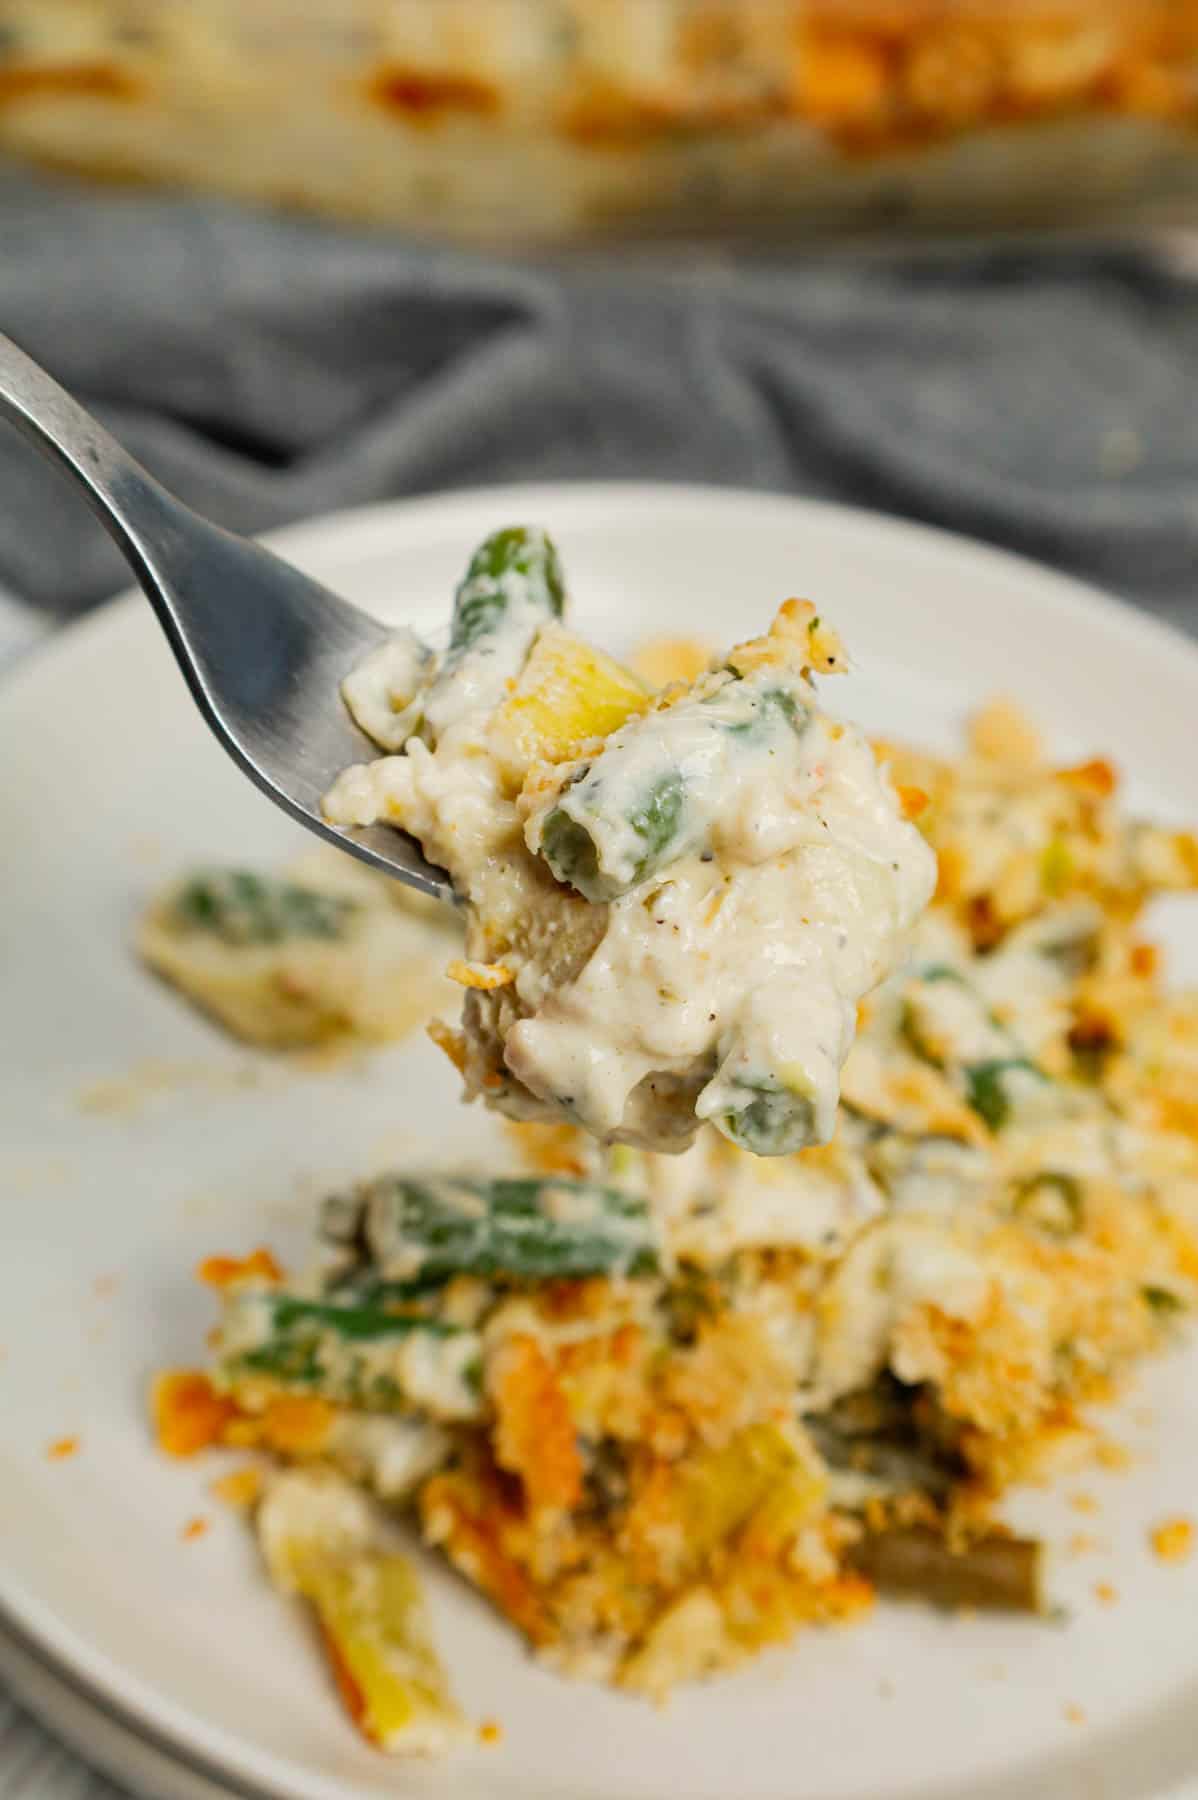 Green Bean Artichoke Casserole is a delicious holiday side dish recipe loaded with cut green beans, artichoke hears, cream cheese, sour cream, mozzarella cheese and parmesan cheese with a crushed Ritz cracker topping.